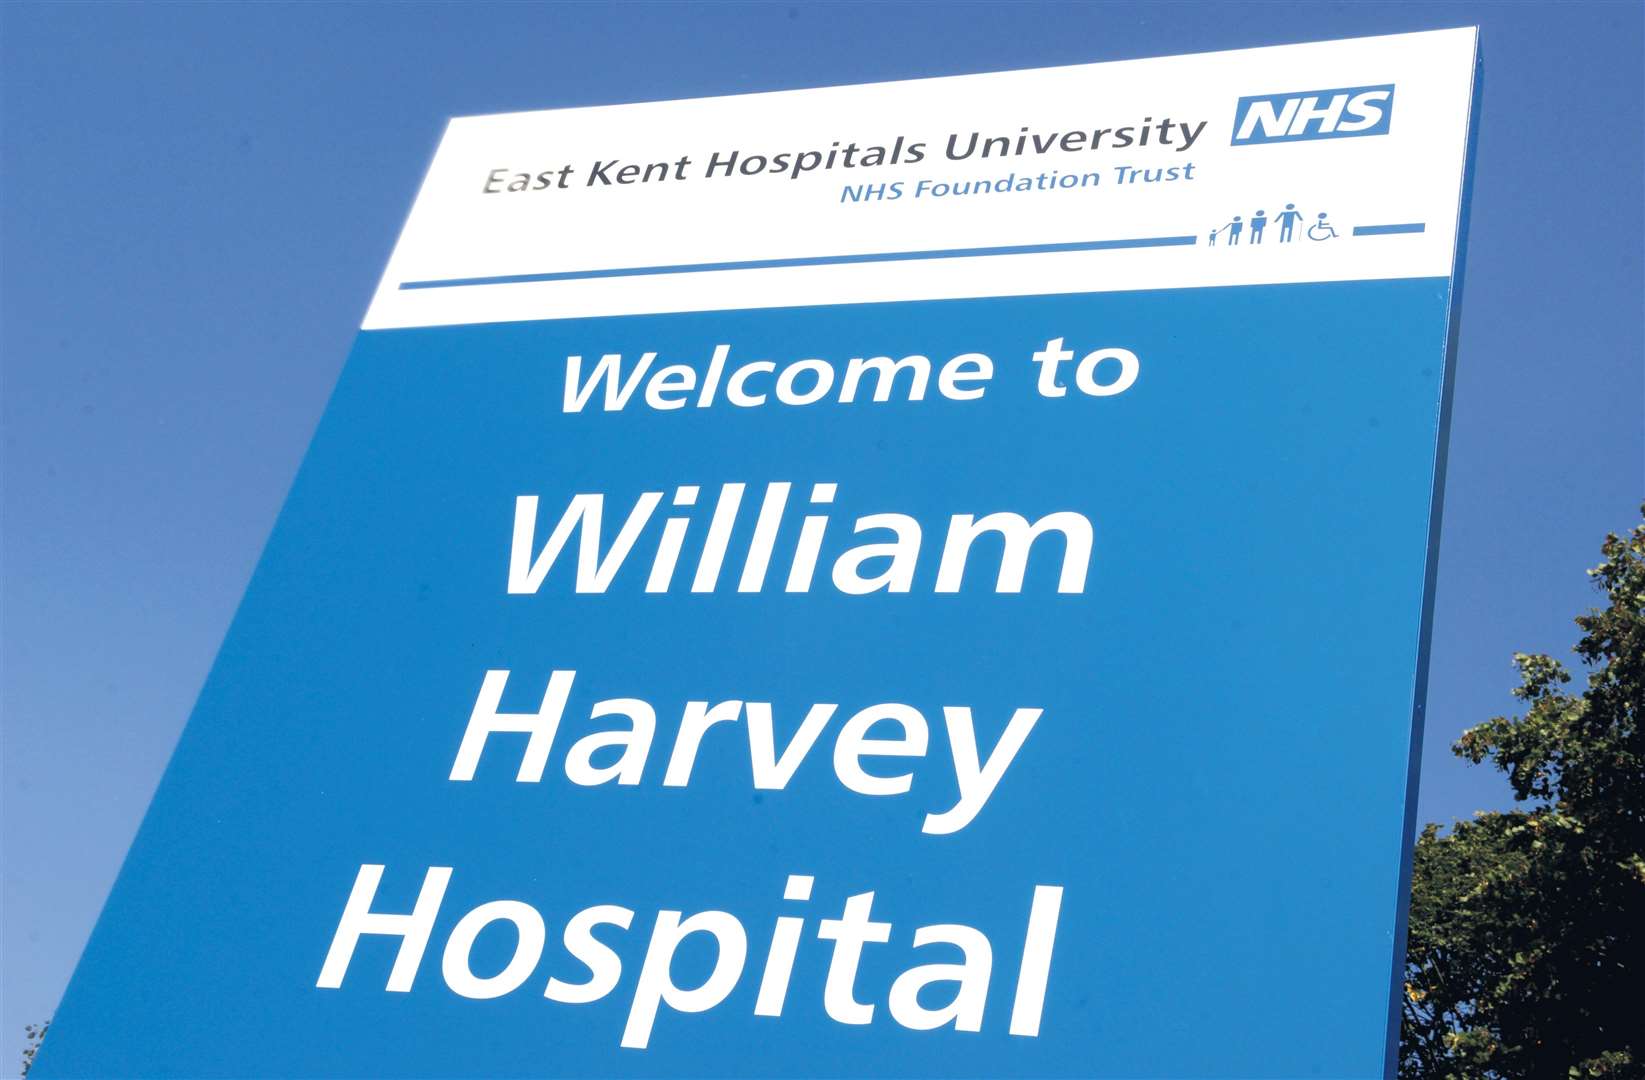 Jones worked at the William Harvey Hospital in Ashford for some time.